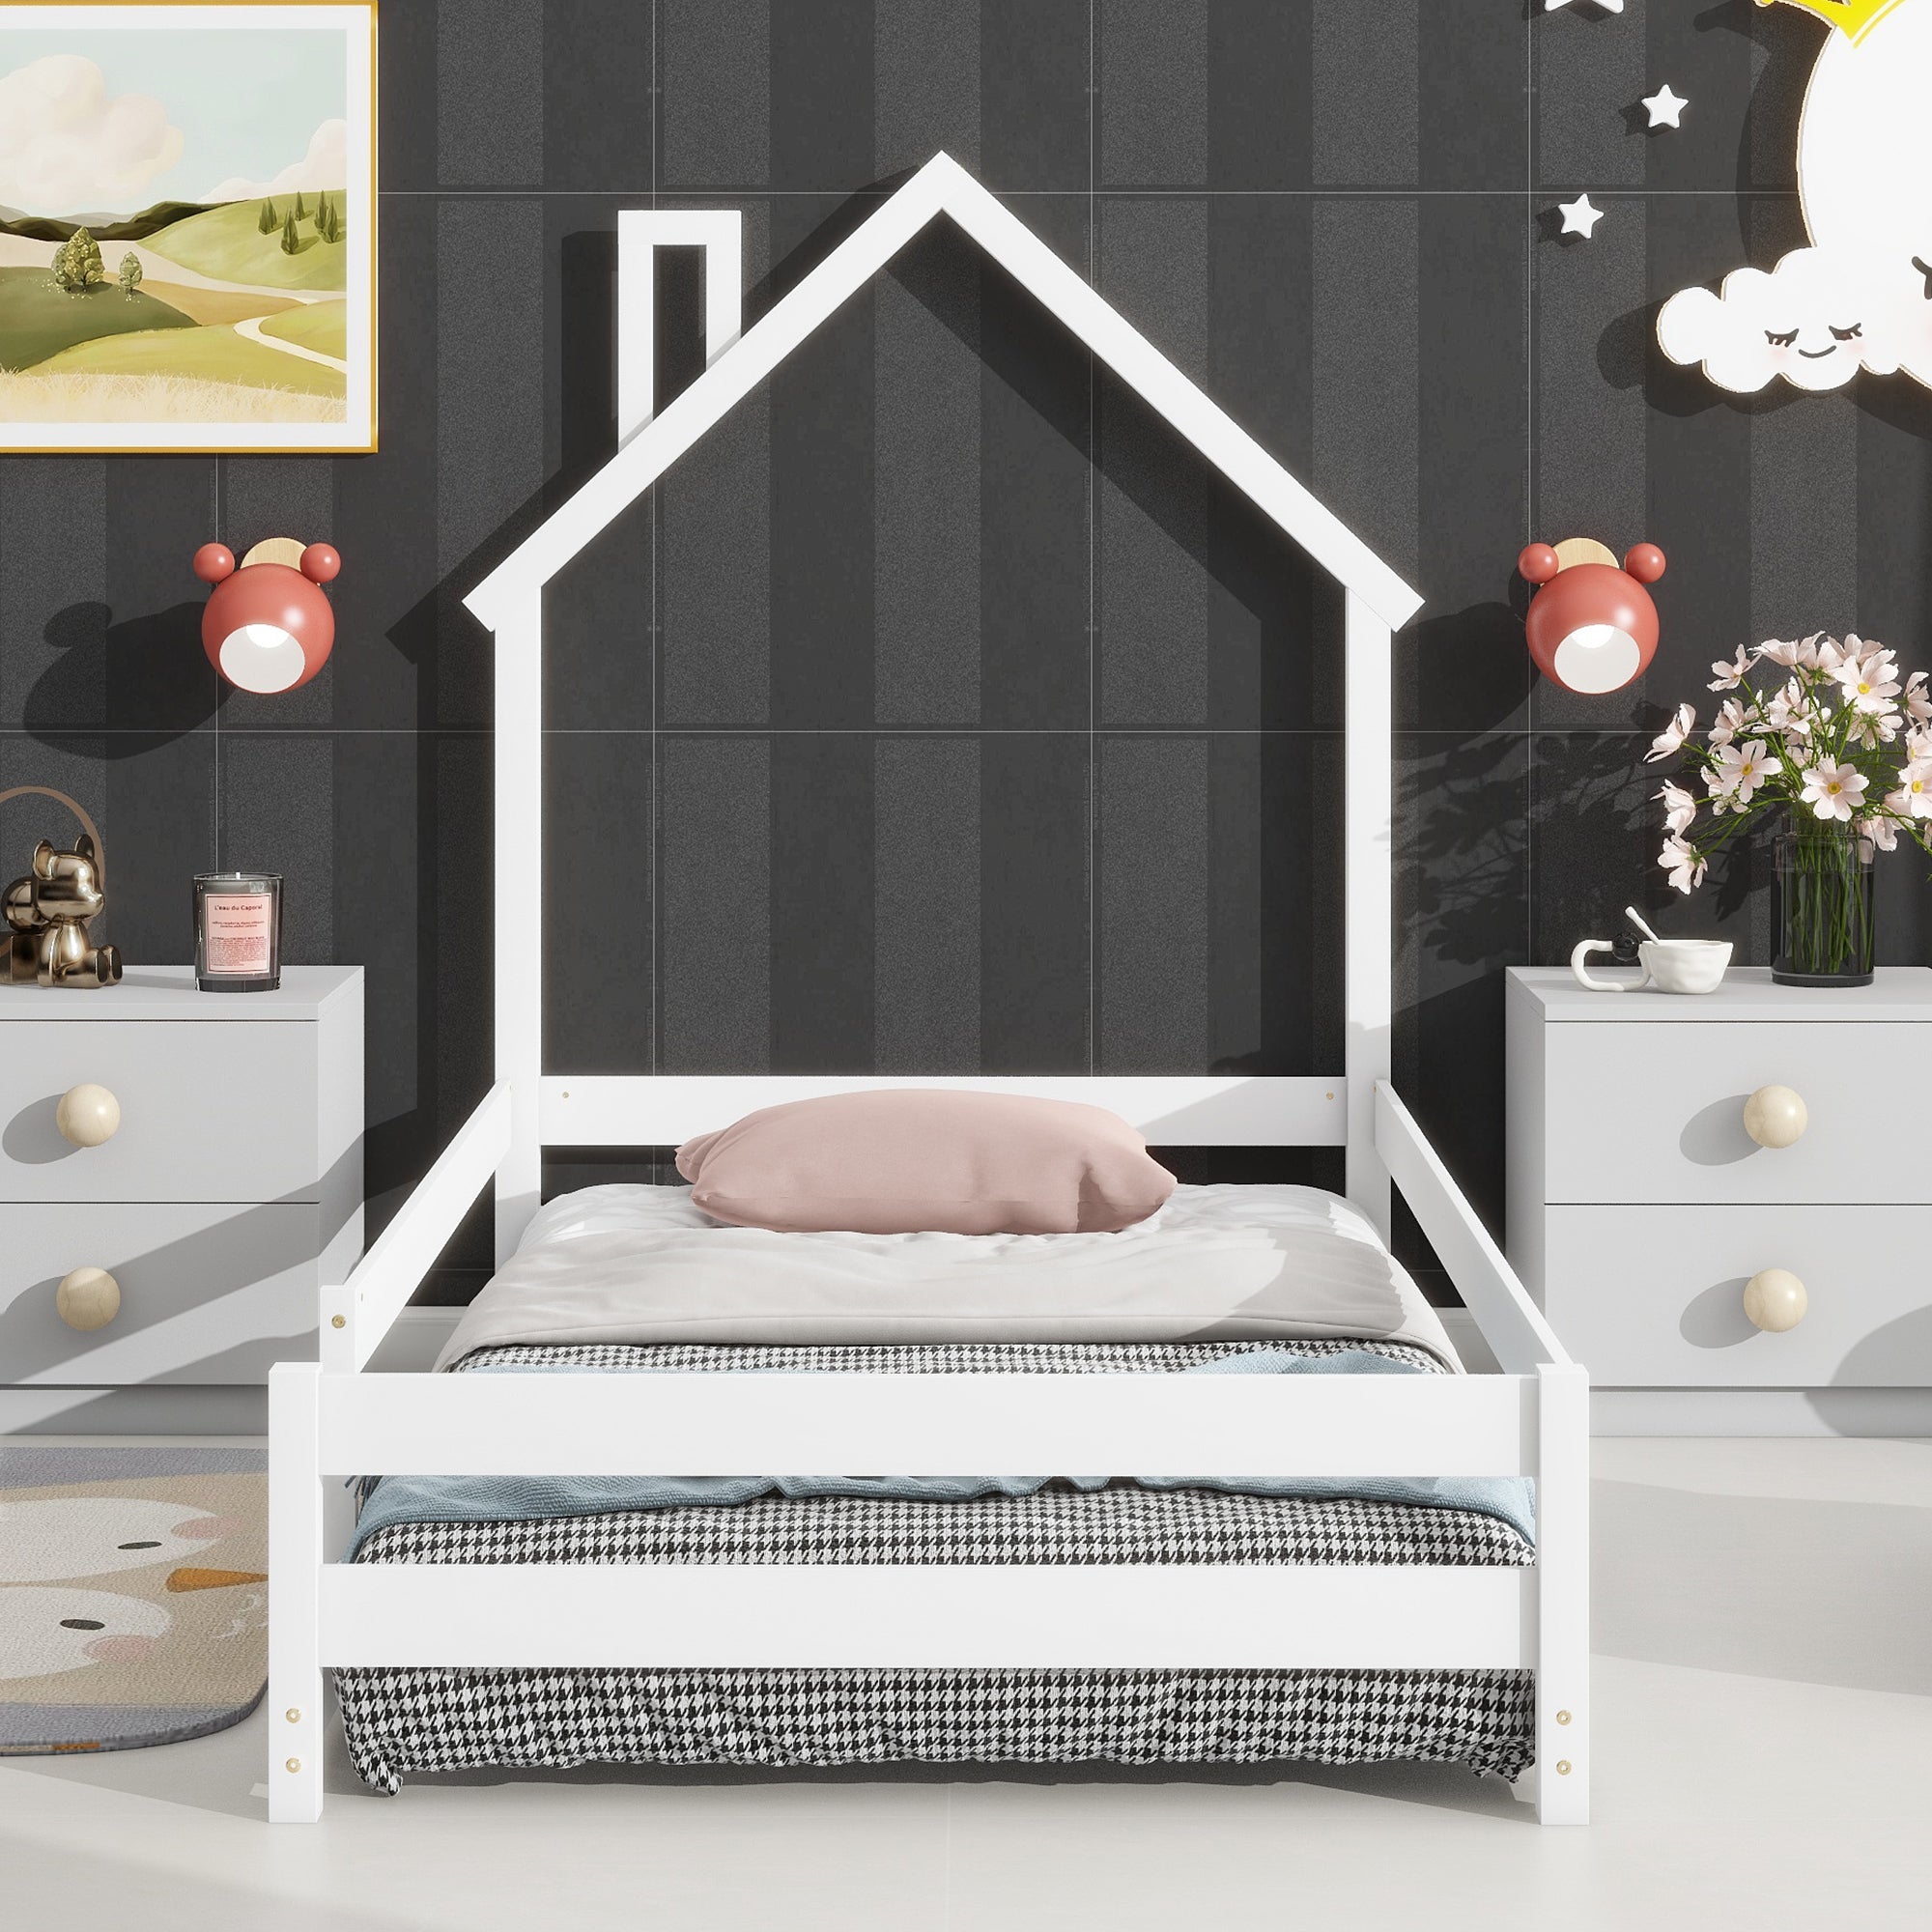 Twin Size Wood bed with House-shaped Headboard Floor bed with Fences,White